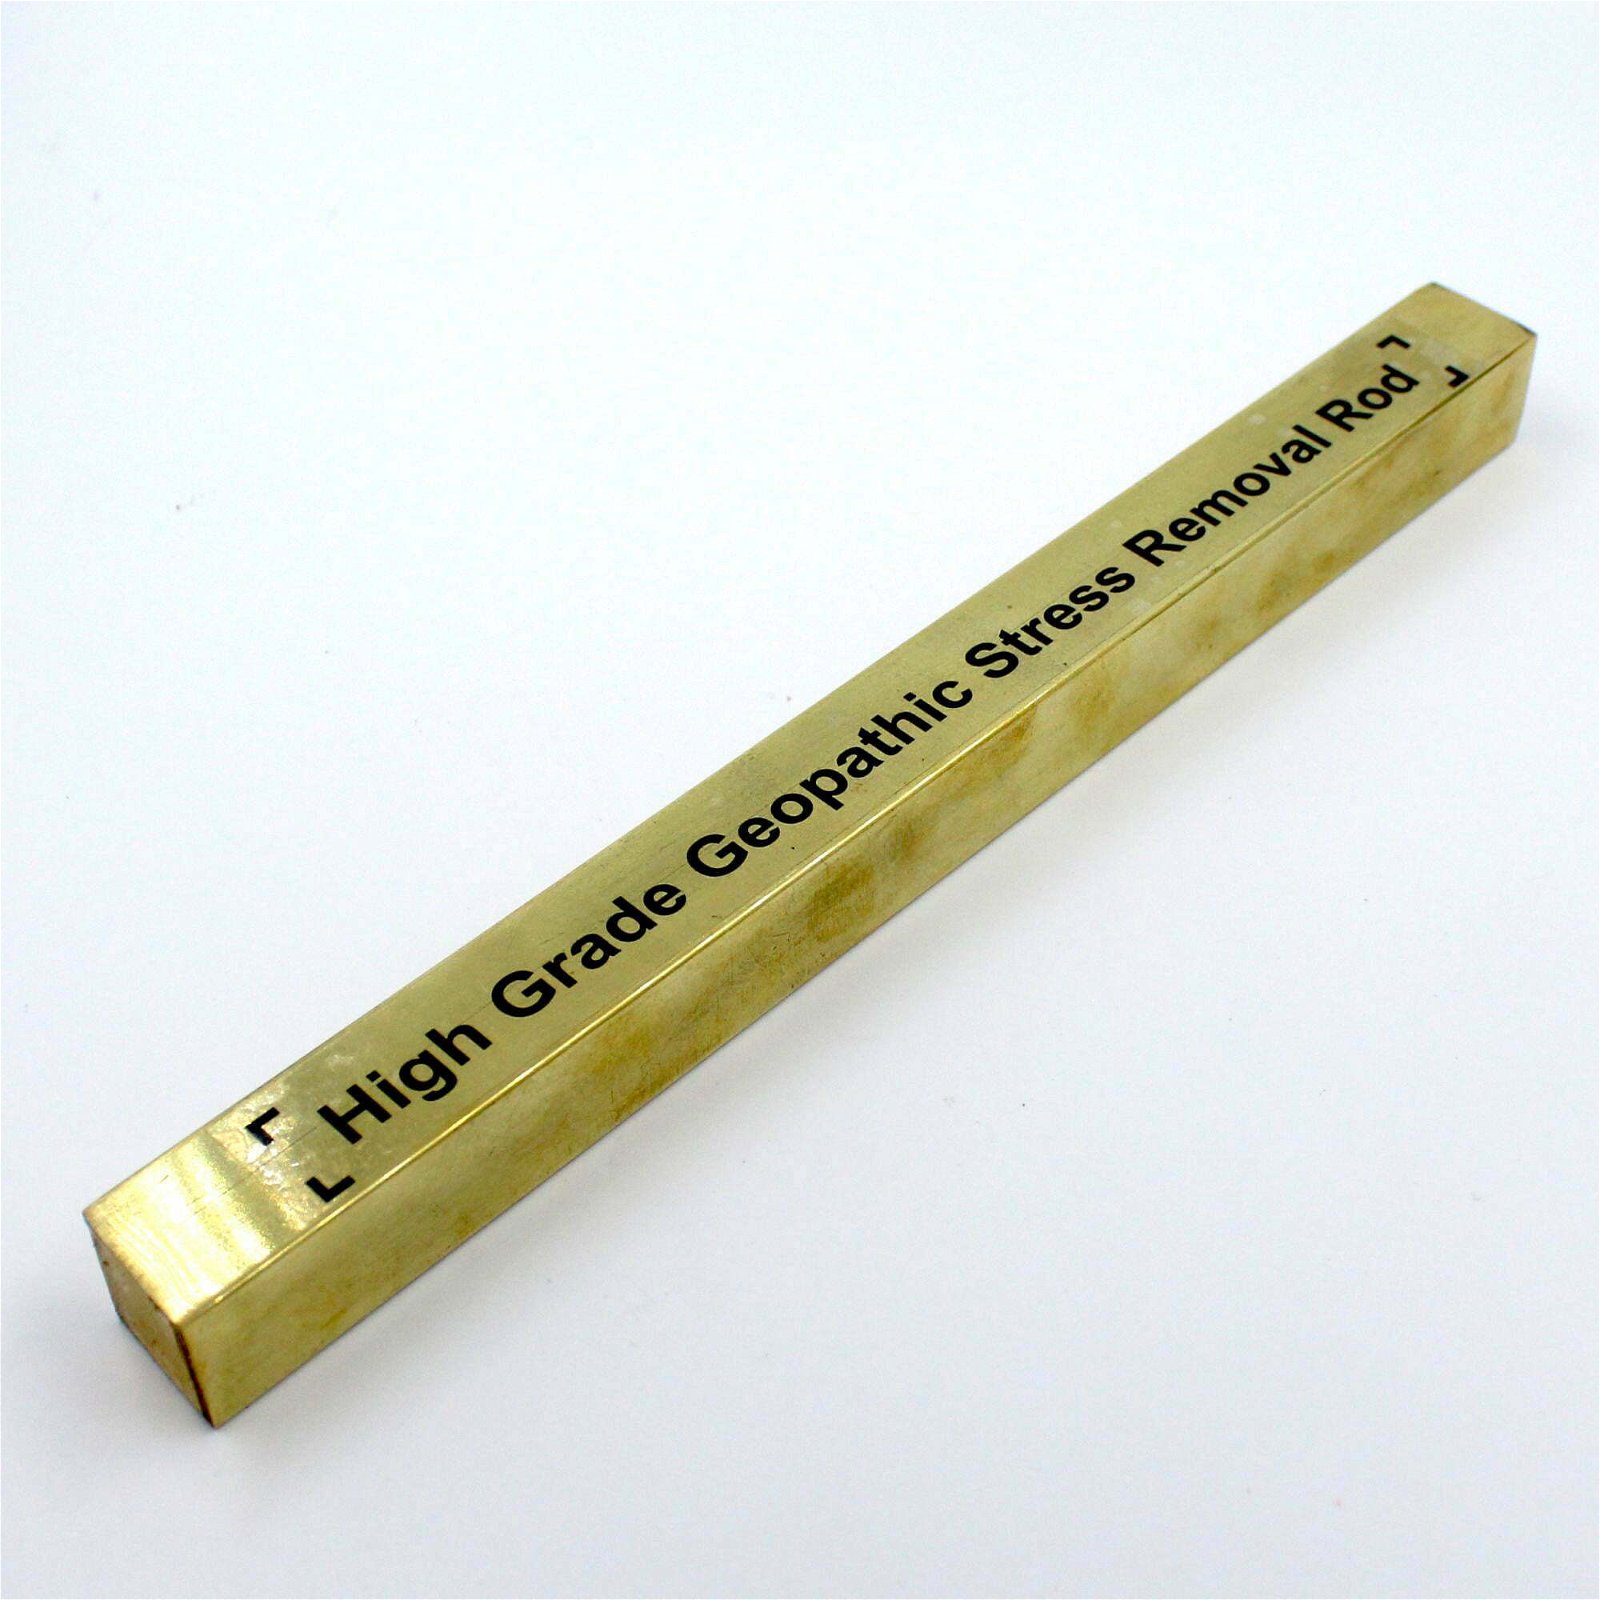 Brass Geopathic Stress Removal Rod